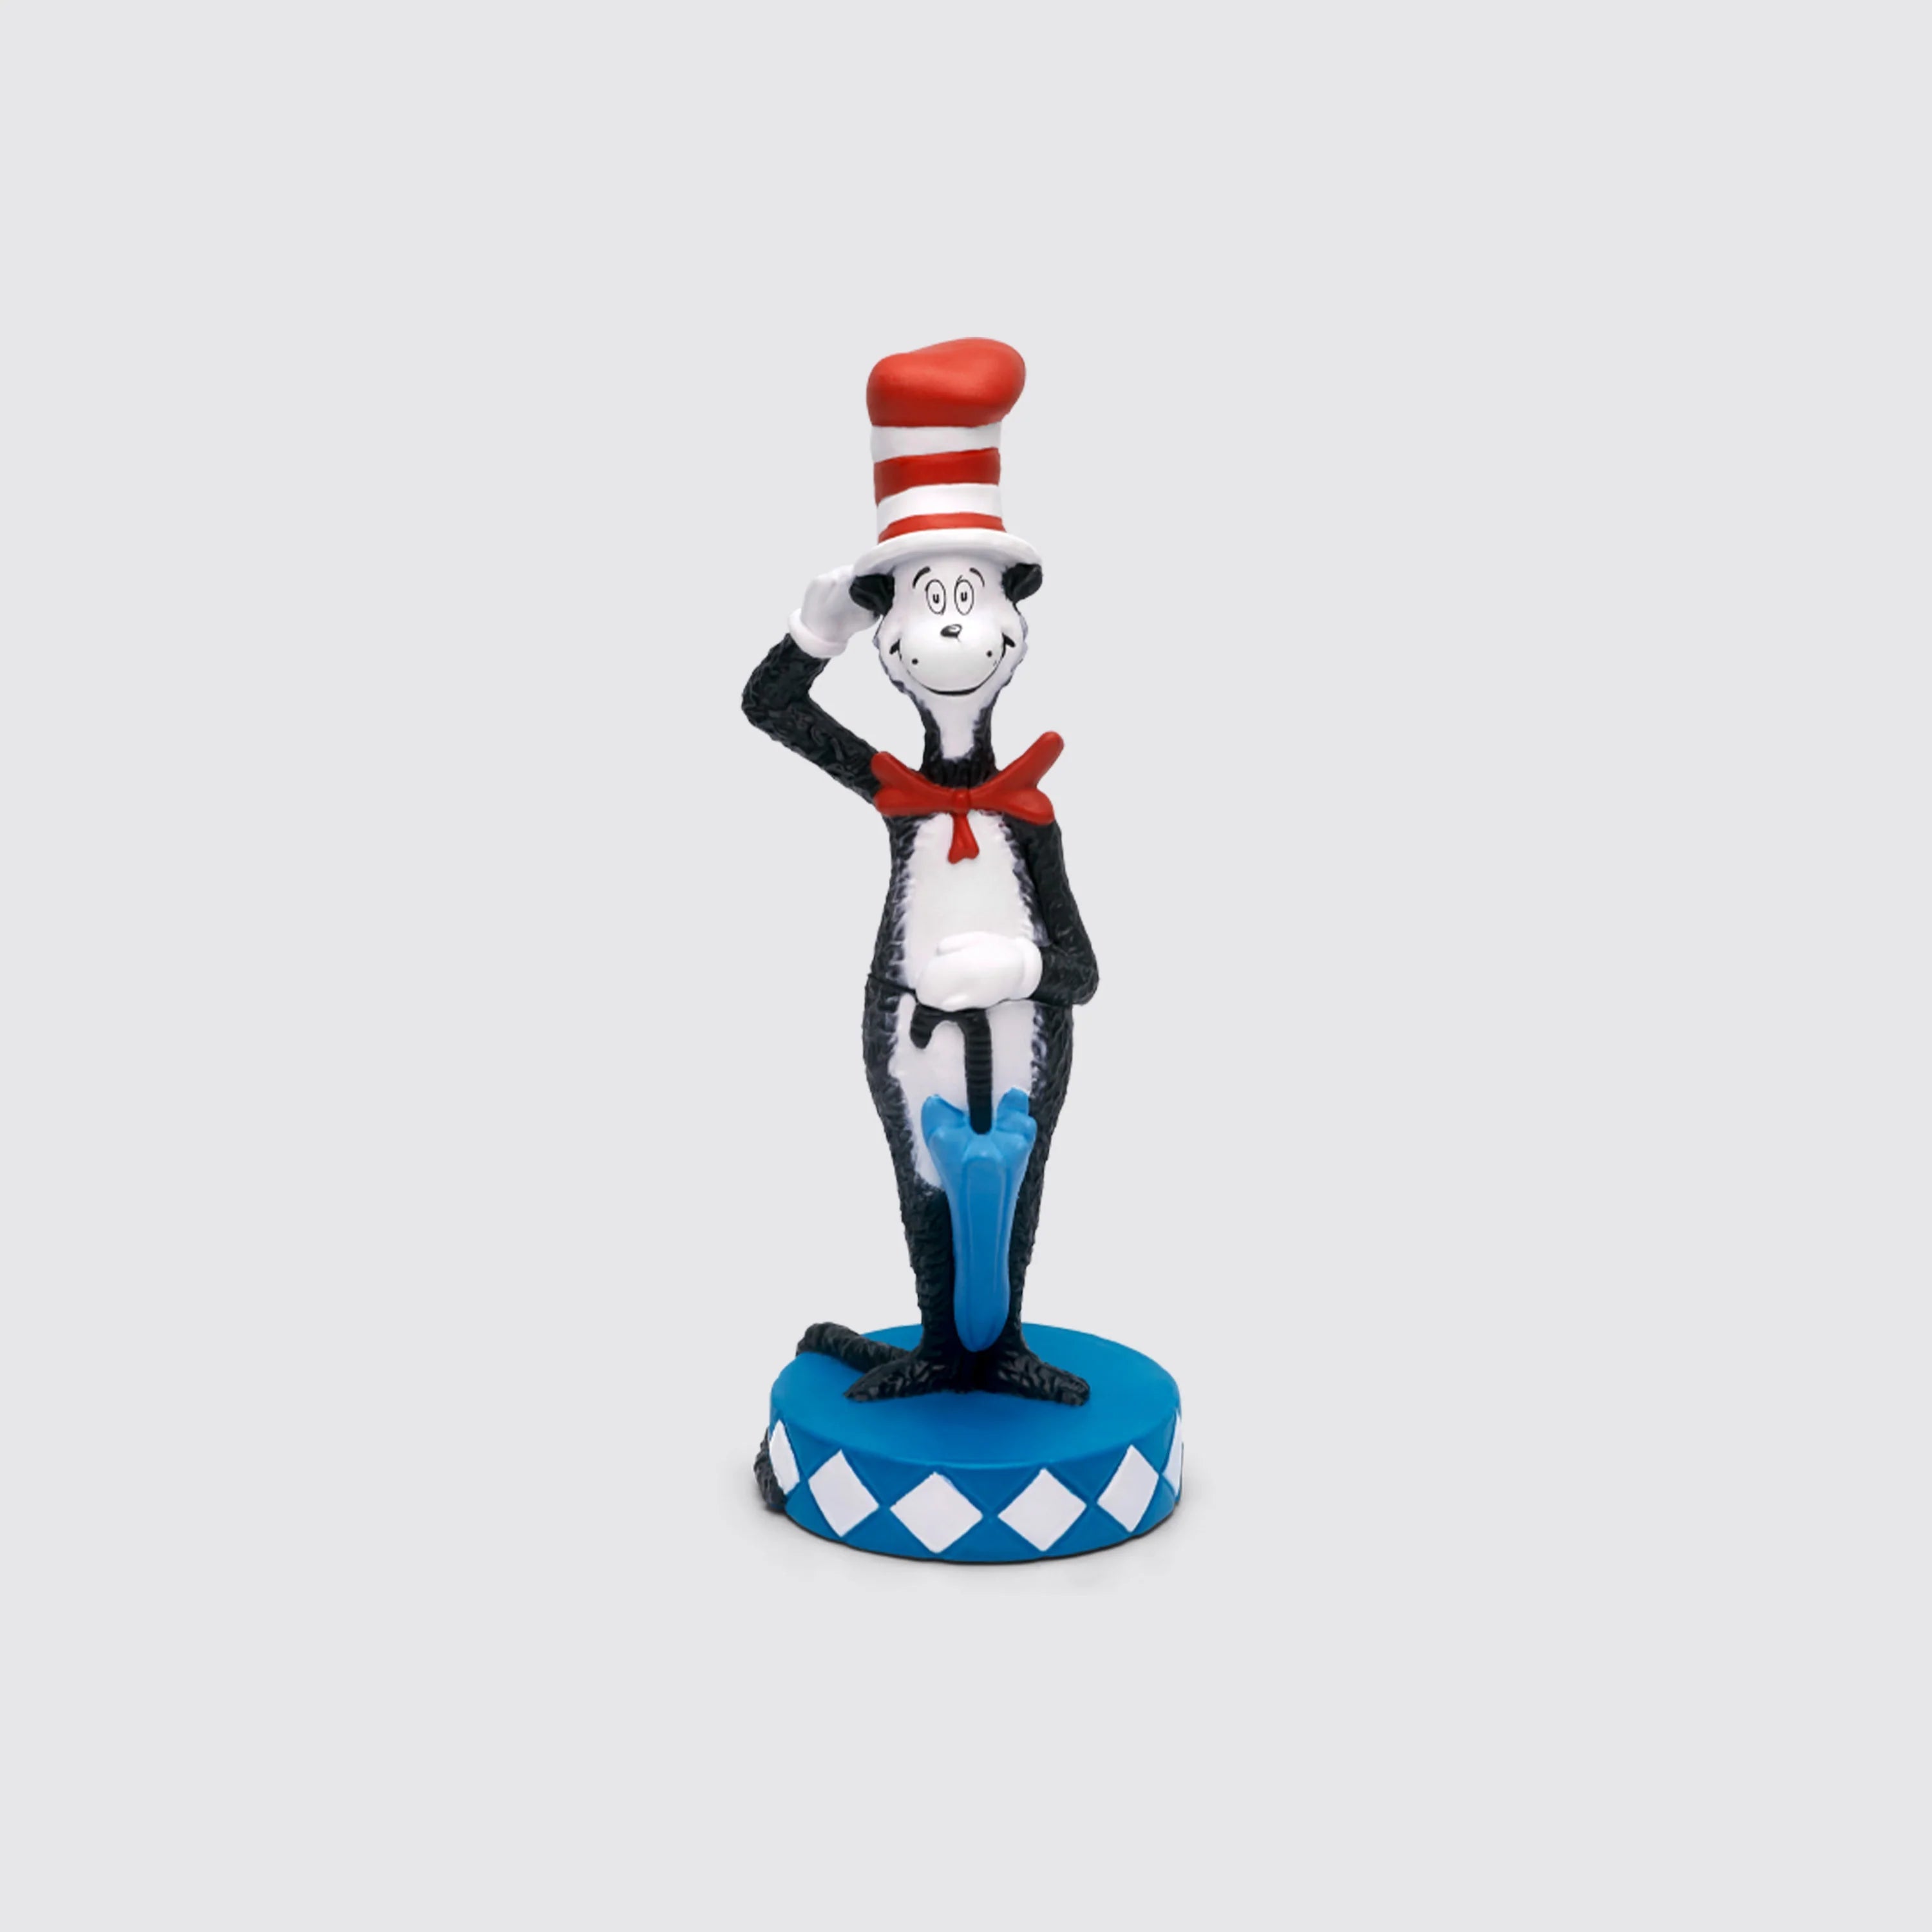 Tonies-Tonies Characters - Dr. Seuss: The Cat in the Hat Tonie-10000792-Legacy Toys